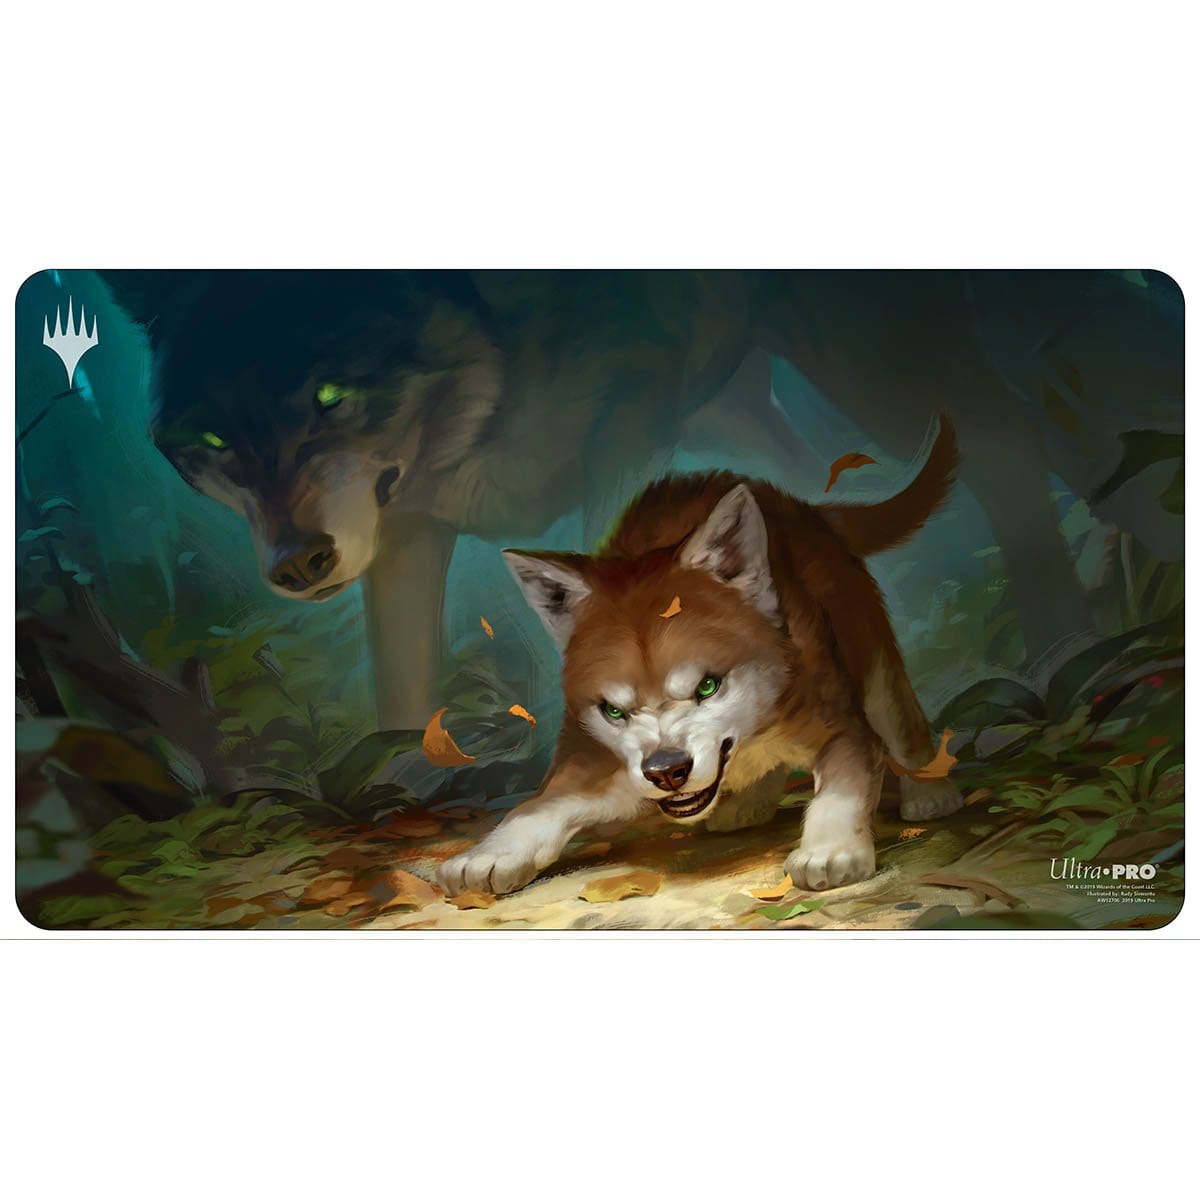 Ferocious Pup Playmat - Playmat - Original Magic Art - Accessories for Magic the Gathering and other card games